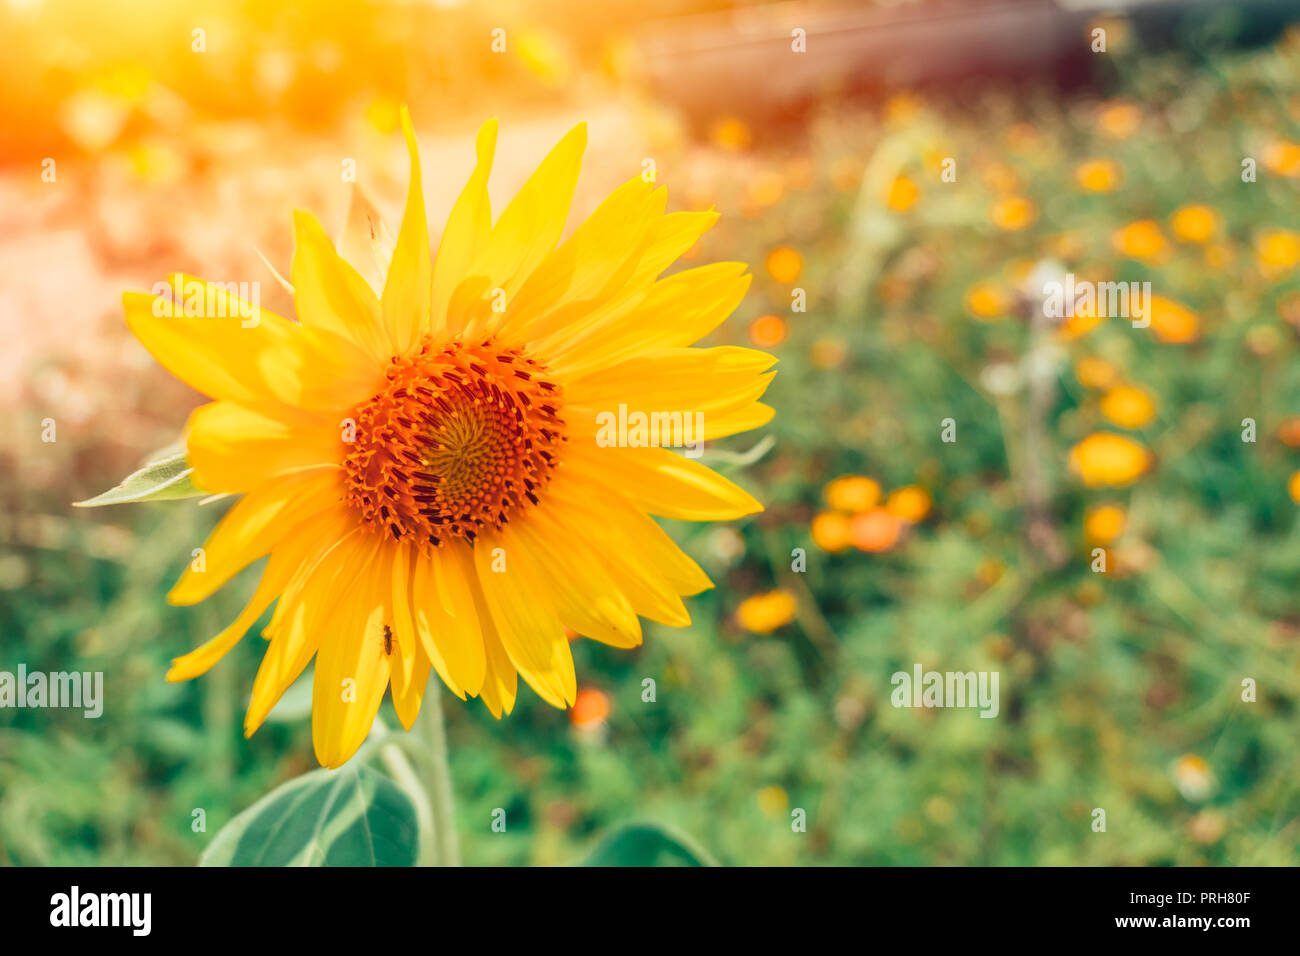 37700 Sunflower On Wood Background Images Stock Photos  Vectors   Shutterstock